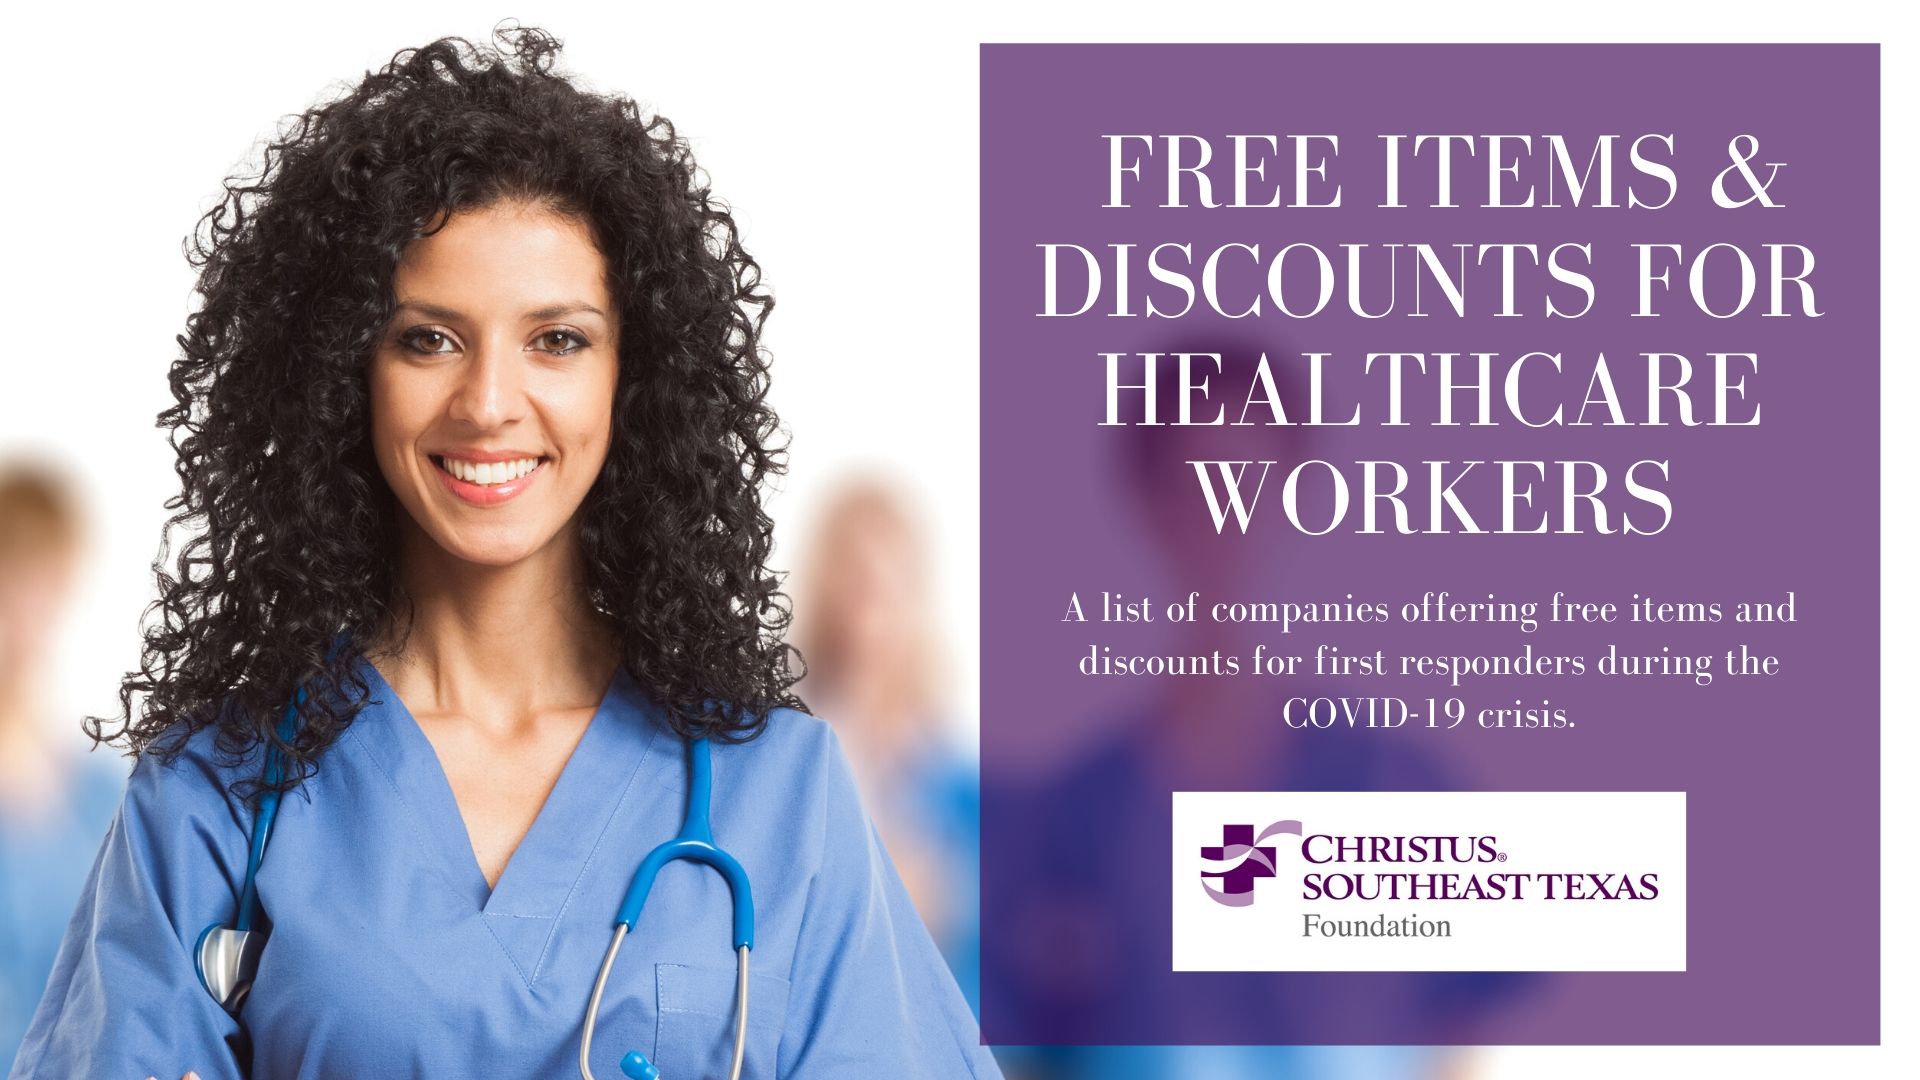 Free Items & Discounts for Healthcare Workers